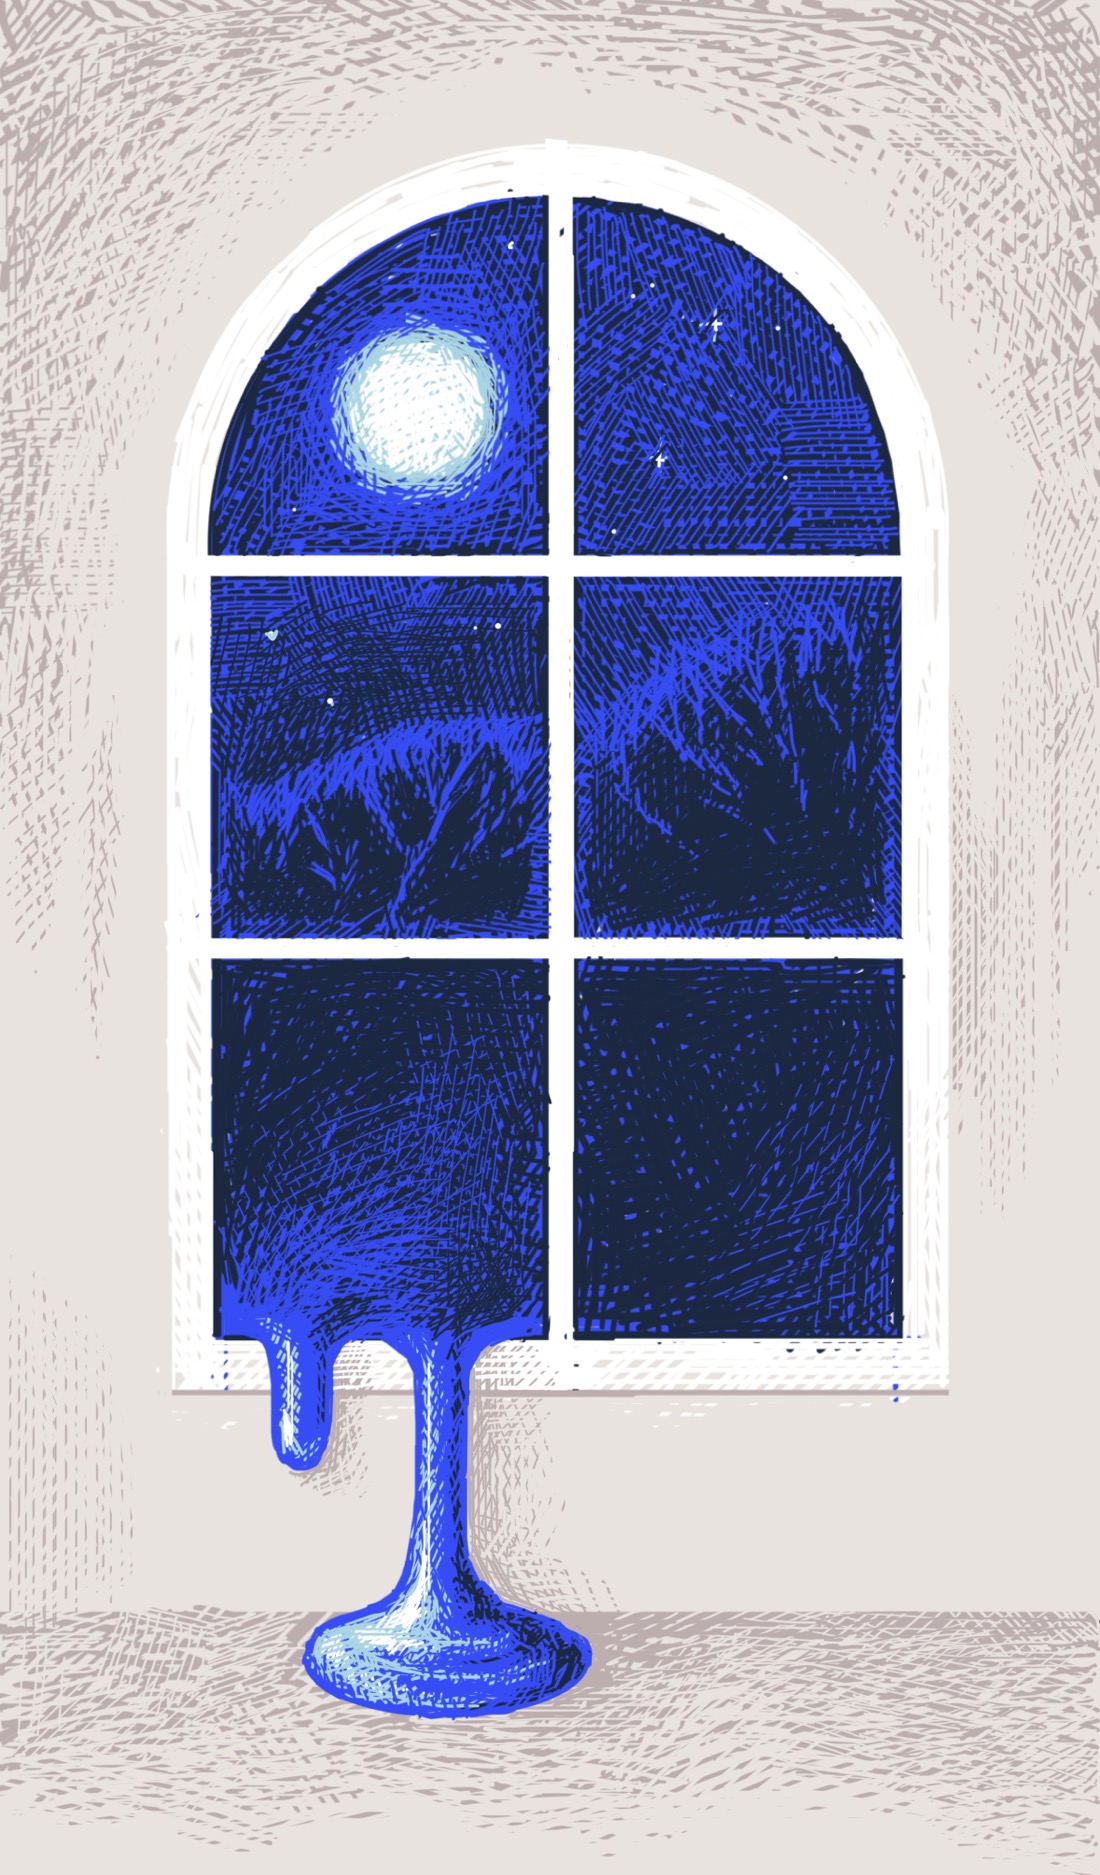 A well-lit room with a window, showing a dark night outside with a full moon and stars. But it looks like the night is leaking through the window into the room; dripping down the wall in a thick, rolling stream like paint.